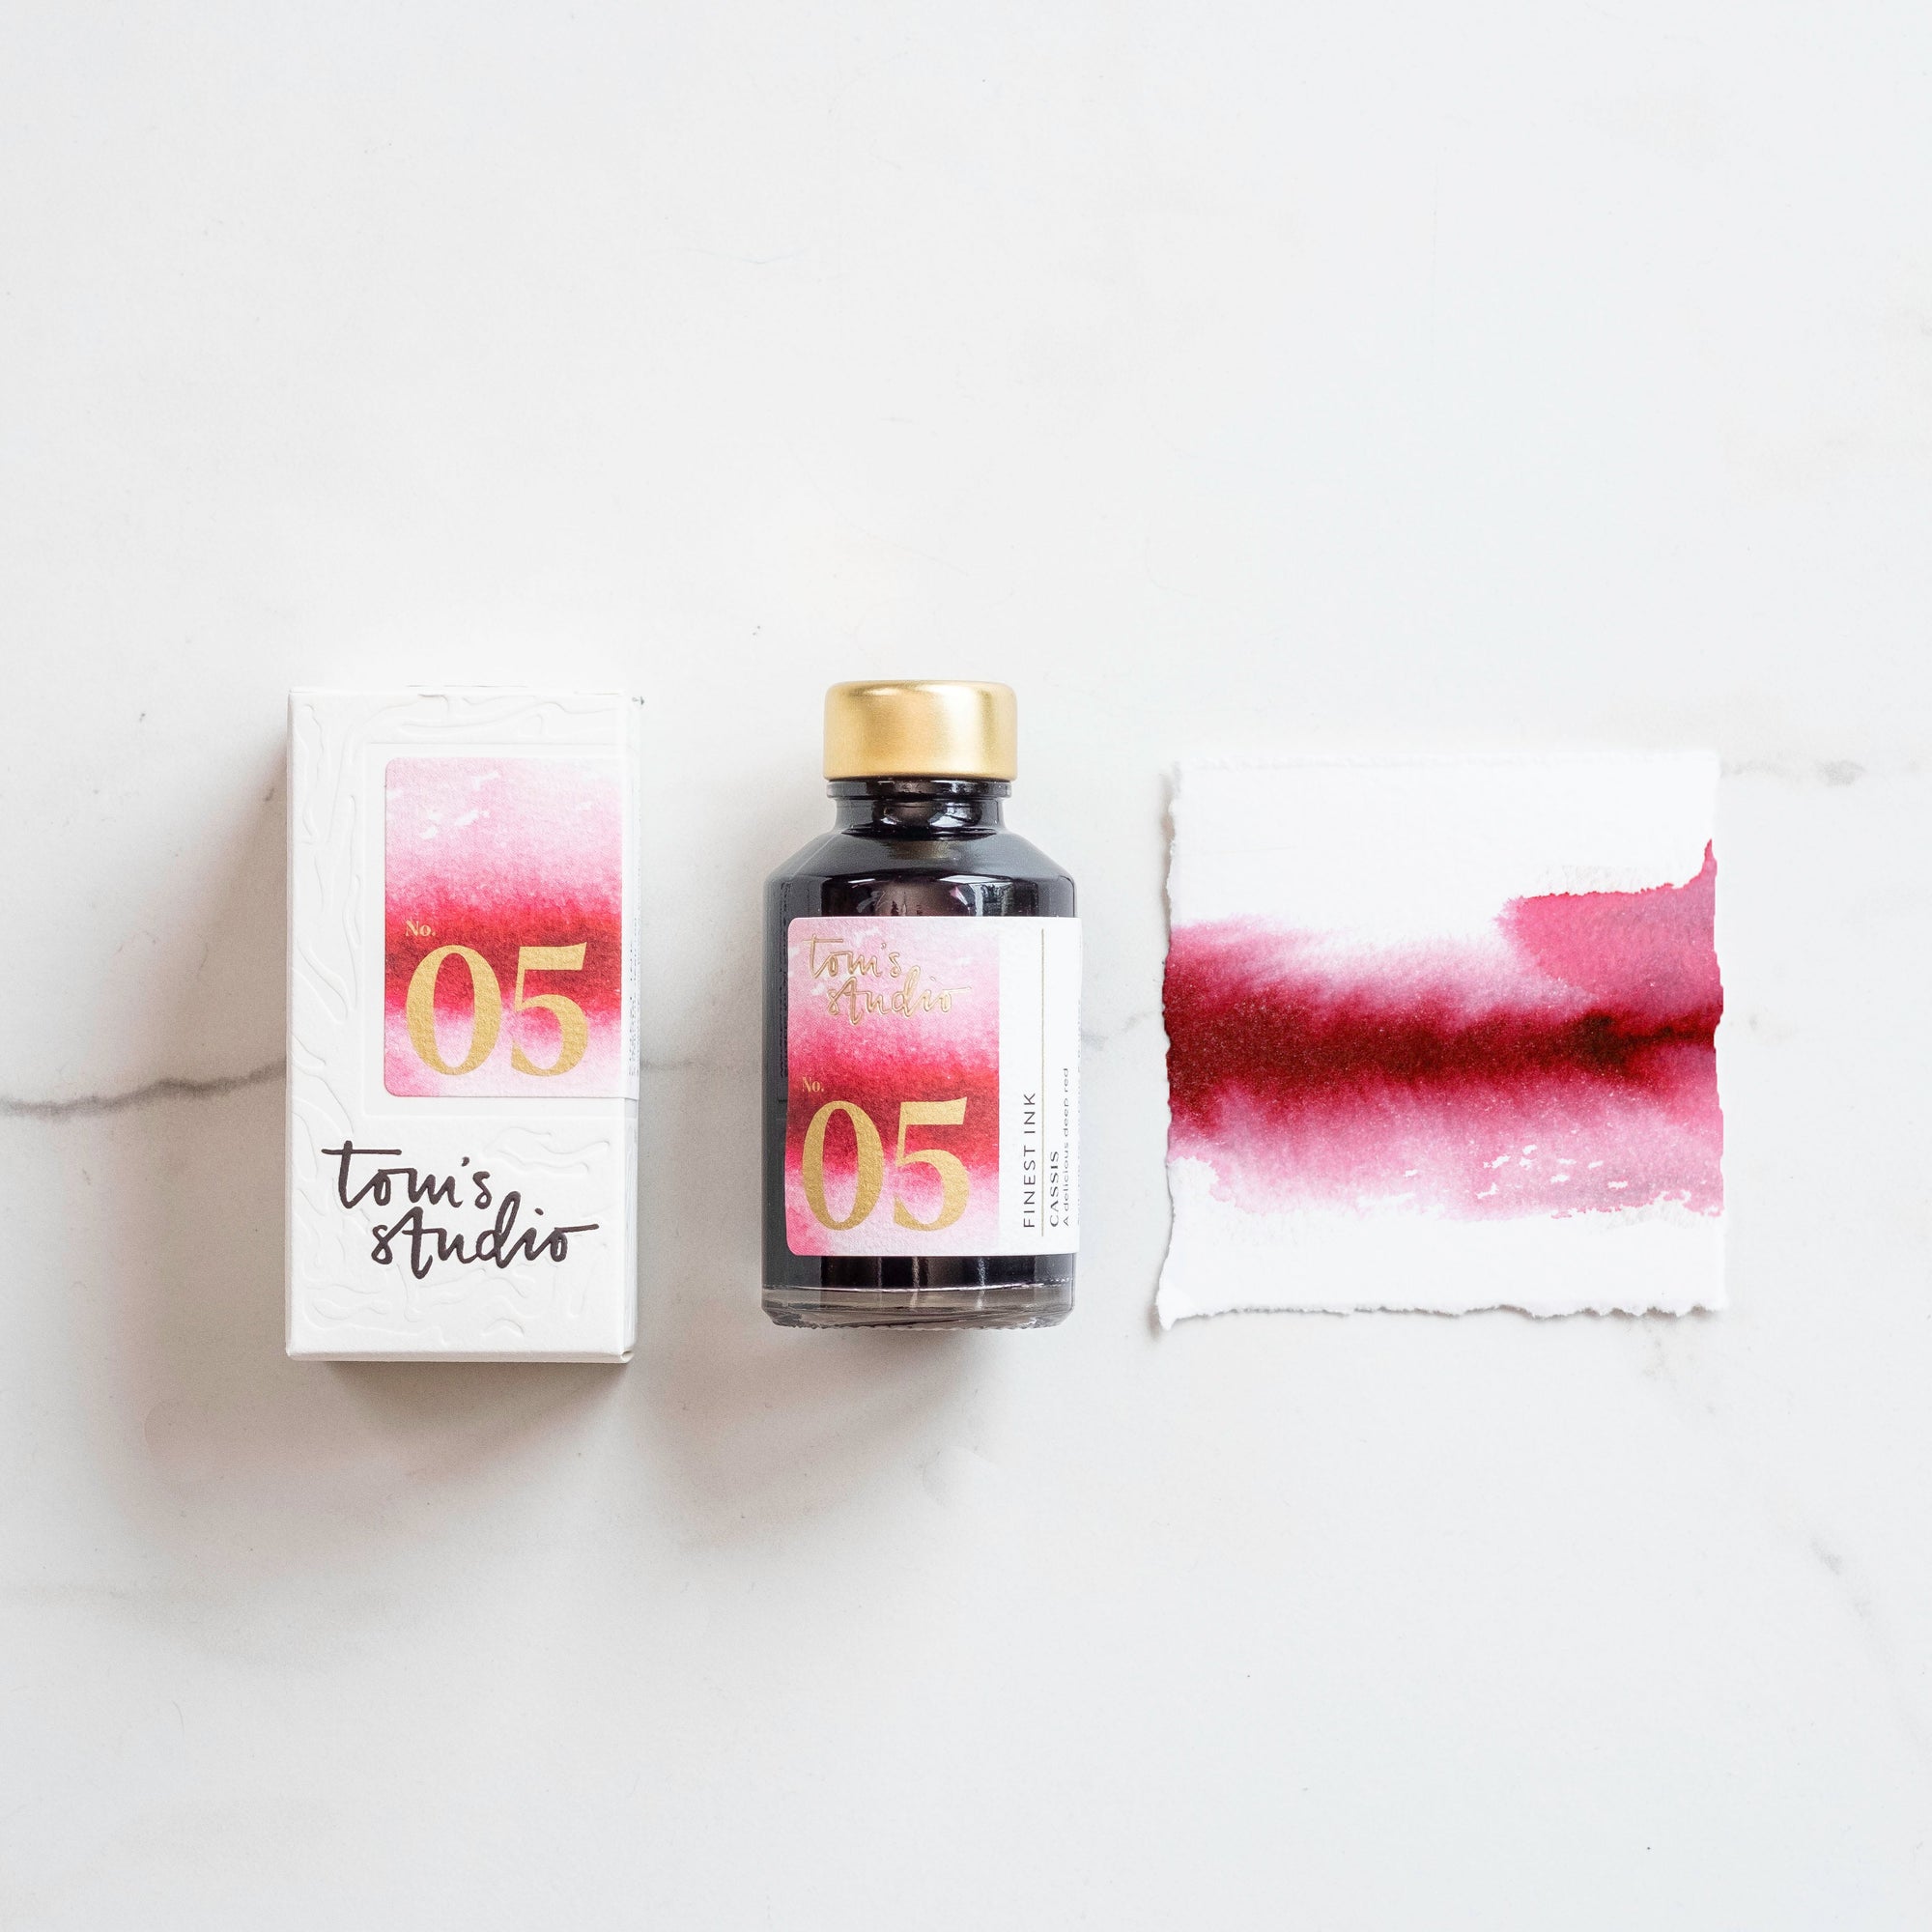 Tom's Studio Cassis Fountain Pen Ink with two pens with inky goodness on paper with an ink swatch demonstrating the colour